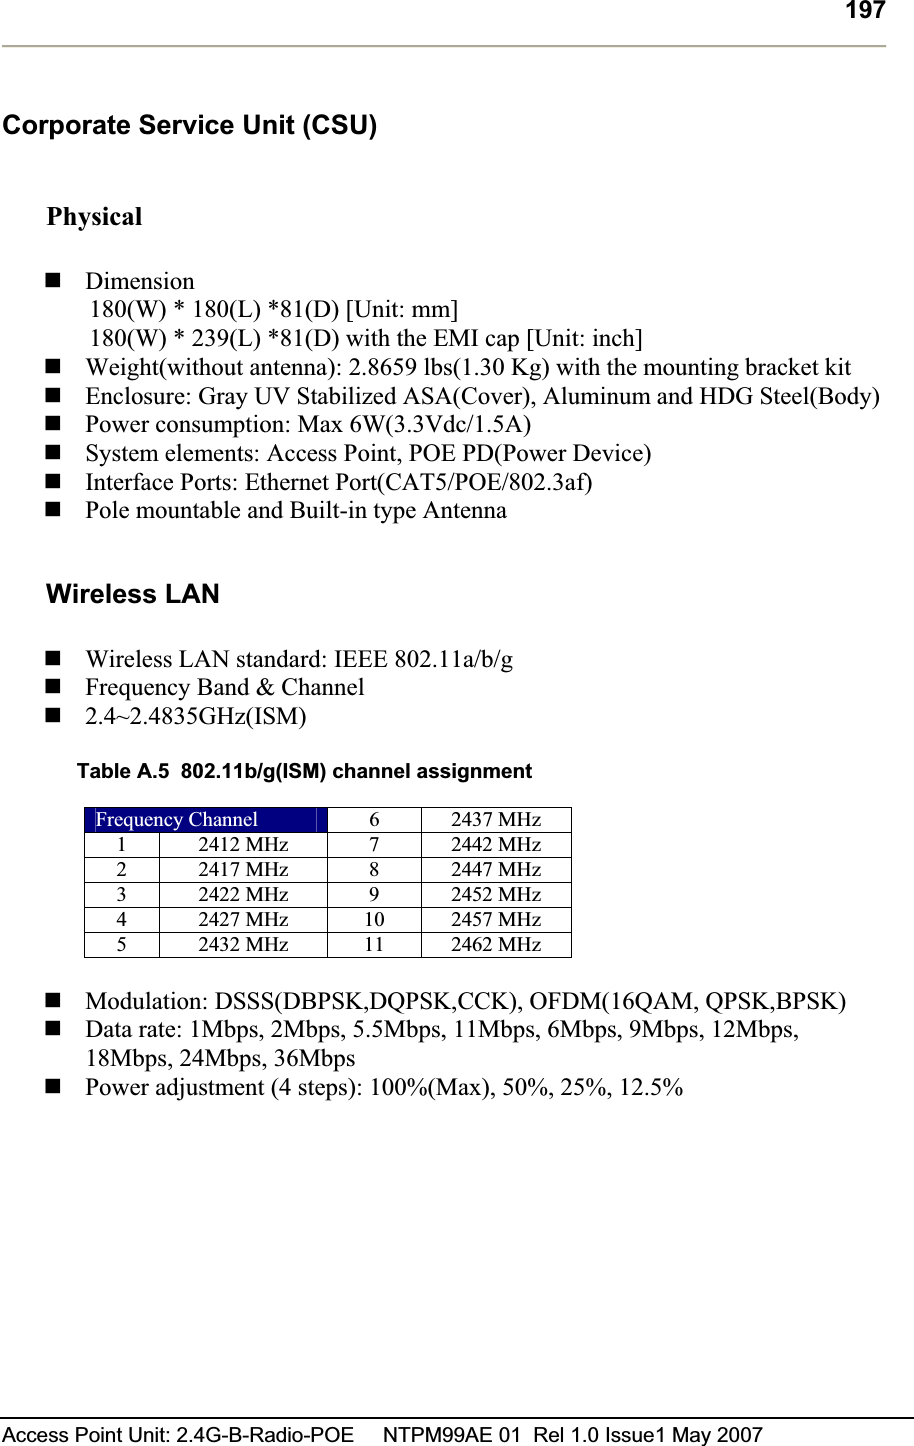 197Access Point Unit: 2.4G-B-Radio-POE     NTPM99AE 01  Rel 1.0 Issue1 May 2007 Corporate Service Unit (CSU) Physical Dimension 180(W) * 180(L) *81(D) [Unit: mm] 180(W) * 239(L) *81(D) with the EMI cap [Unit: inch] Weight(without antenna): 2.8659 lbs(1.30 Kg) with the mounting bracket kit Enclosure: Gray UV Stabilized ASA(Cover), Aluminum and HDG Steel(Body) Power consumption: Max 6W(3.3Vdc/1.5A) System elements: Access Point, POE PD(Power Device) Interface Ports: Ethernet Port(CAT5/POE/802.3af) Pole mountable and Built-in type Antenna  Wireless LANWireless LAN standard: IEEE 802.11a/b/g Frequency Band &amp; Channel 2.4~2.4835GHz(ISM)Table A.5  802.11b/g(ISM) channel assignment Frequency Channel  6 2437 MHz 1 2412 MHz  7 2442 MHz 2 2417 MHz  8 2447 MHz 3 2422 MHz  9 2452 MHz 4  2427 MHz  10  2457 MHz 5  2432 MHz  11  2462 MHz Modulation: DSSS(DBPSK,DQPSK,CCK), OFDM(16QAM, QPSK,BPSK)  Data rate: 1Mbps, 2Mbps, 5.5Mbps, 11Mbps, 6Mbps, 9Mbps, 12Mbps, 18Mbps, 24Mbps, 36Mbps Power adjustment (4 steps): 100%(Max), 50%, 25%, 12.5%  